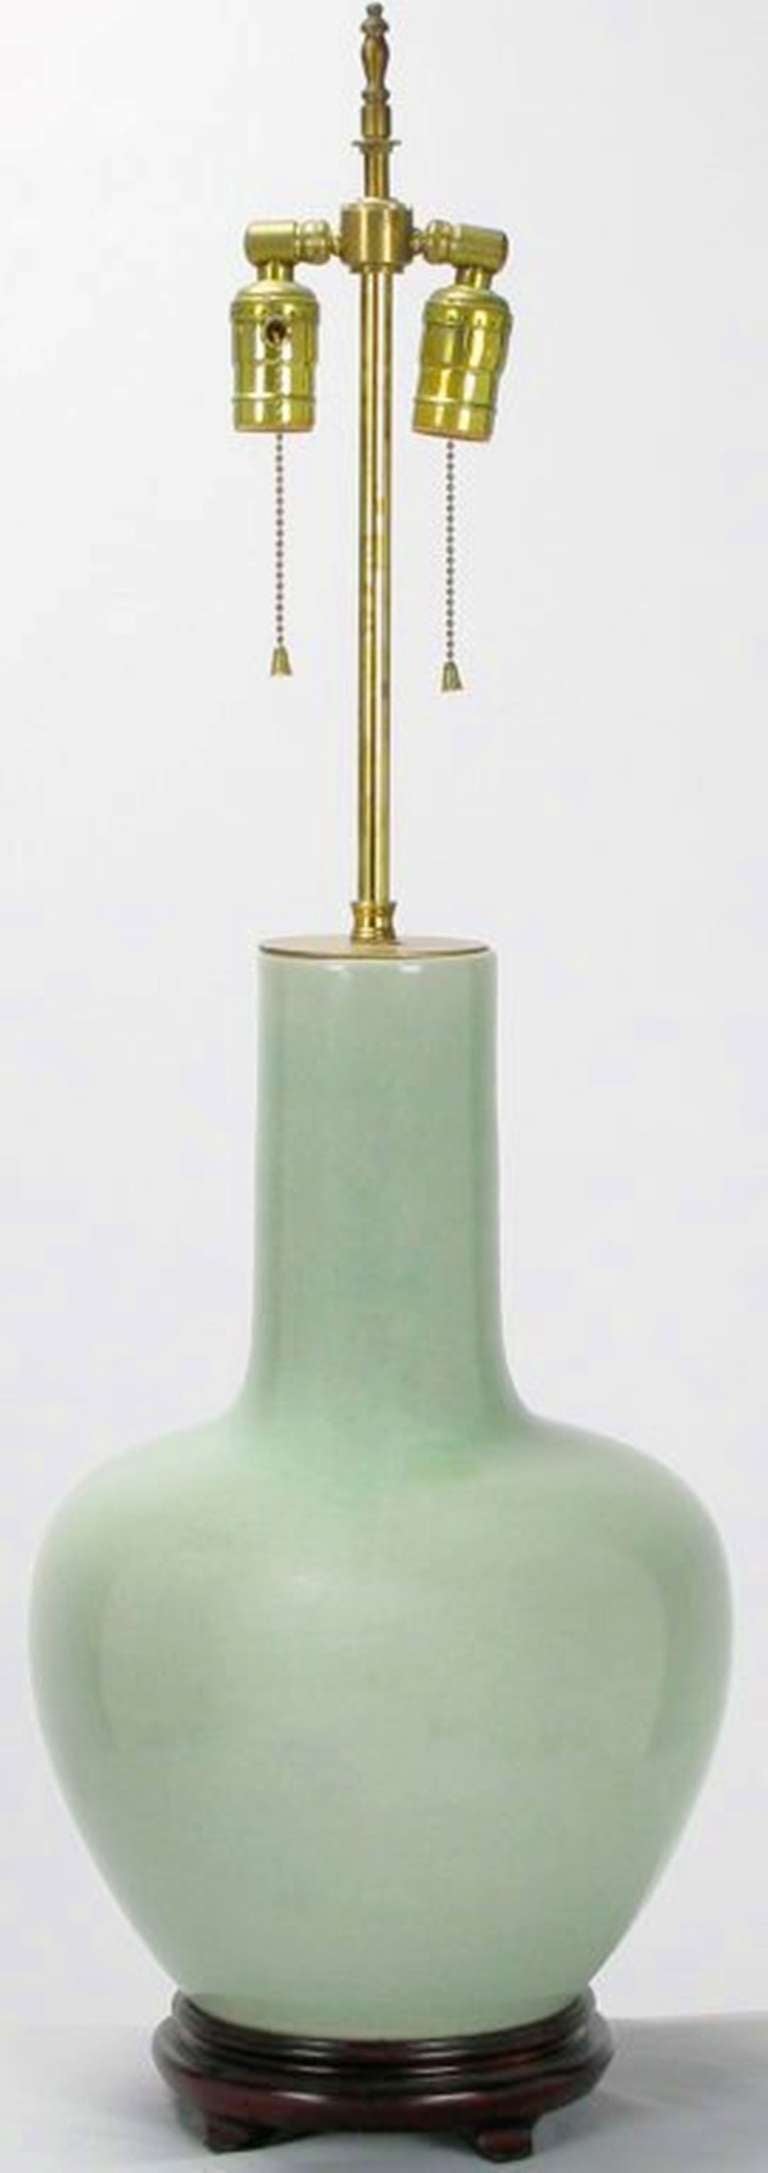 Celadon-green glazed ceramic gourd form body. Carved wood base and brass cap. Adjustable stem and dual socket illumination with on/off pull chains. Slight crackle to glazed finish. Sold sans shade.